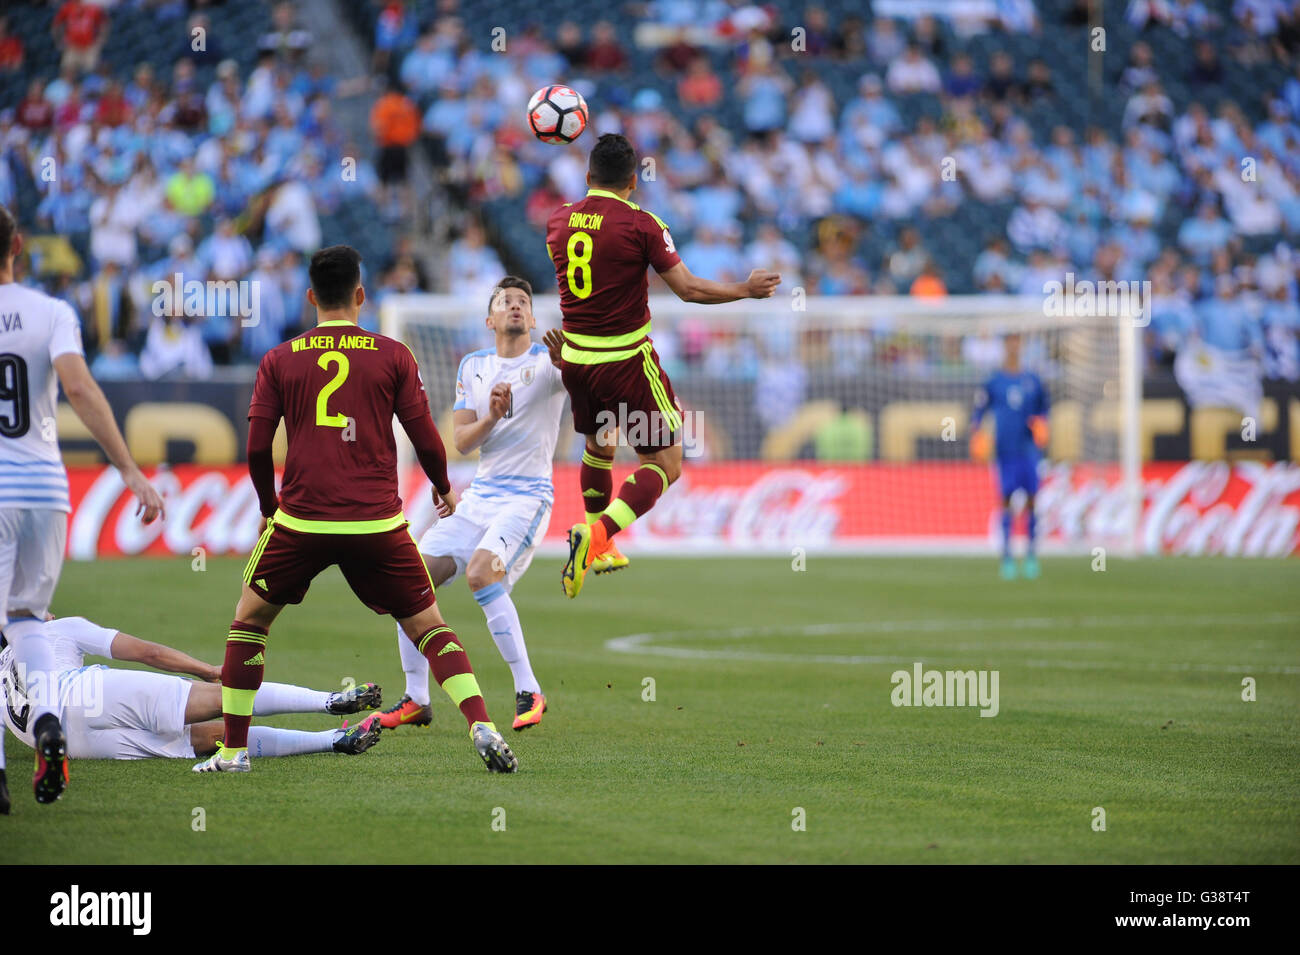 Philadelphia, Pennsylvania, USA. 9th June, 2016. TOMAS RINCON (8) of Venezuela in action against Uruguay during the Copa America match held at Lincoln Financial Field in Philadelphia Pa Credit:  Ricky Fitchett/ZUMA Wire/Alamy Live News Stock Photo